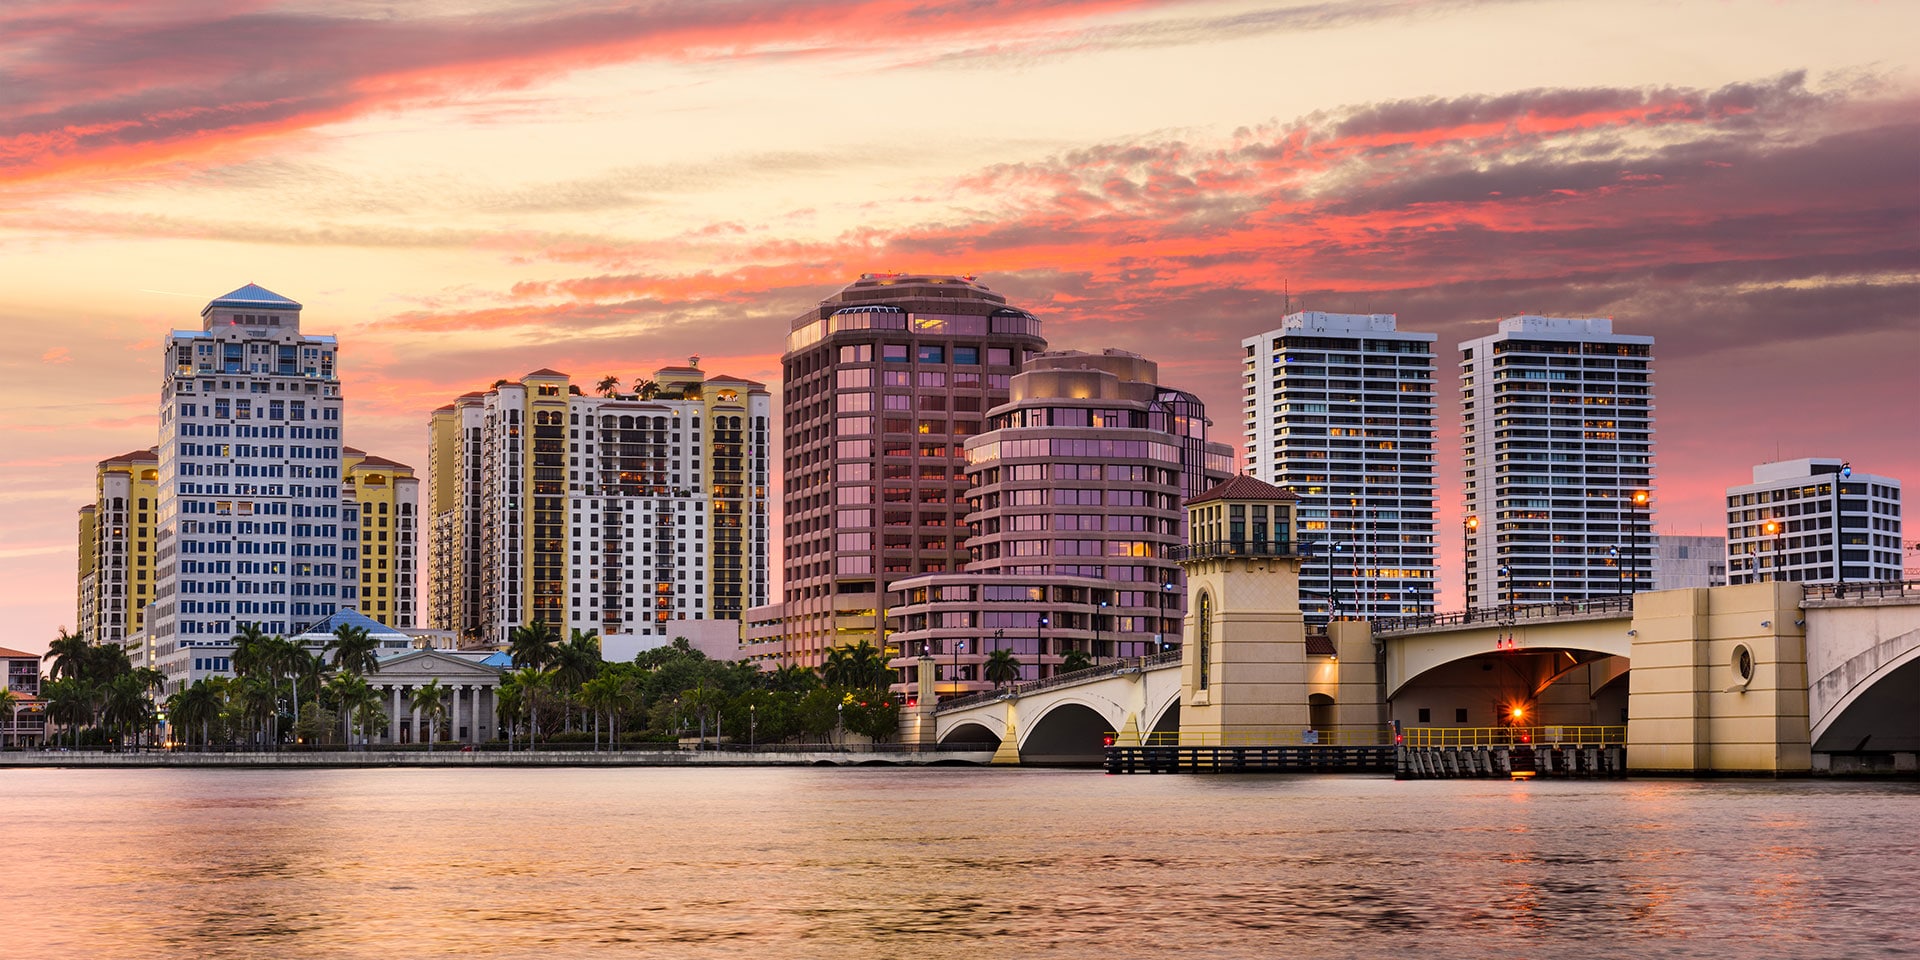 Cultured or Quirky? Choose Your Vibe on a West Palm Beach to Fort Lauderdale Road Trip